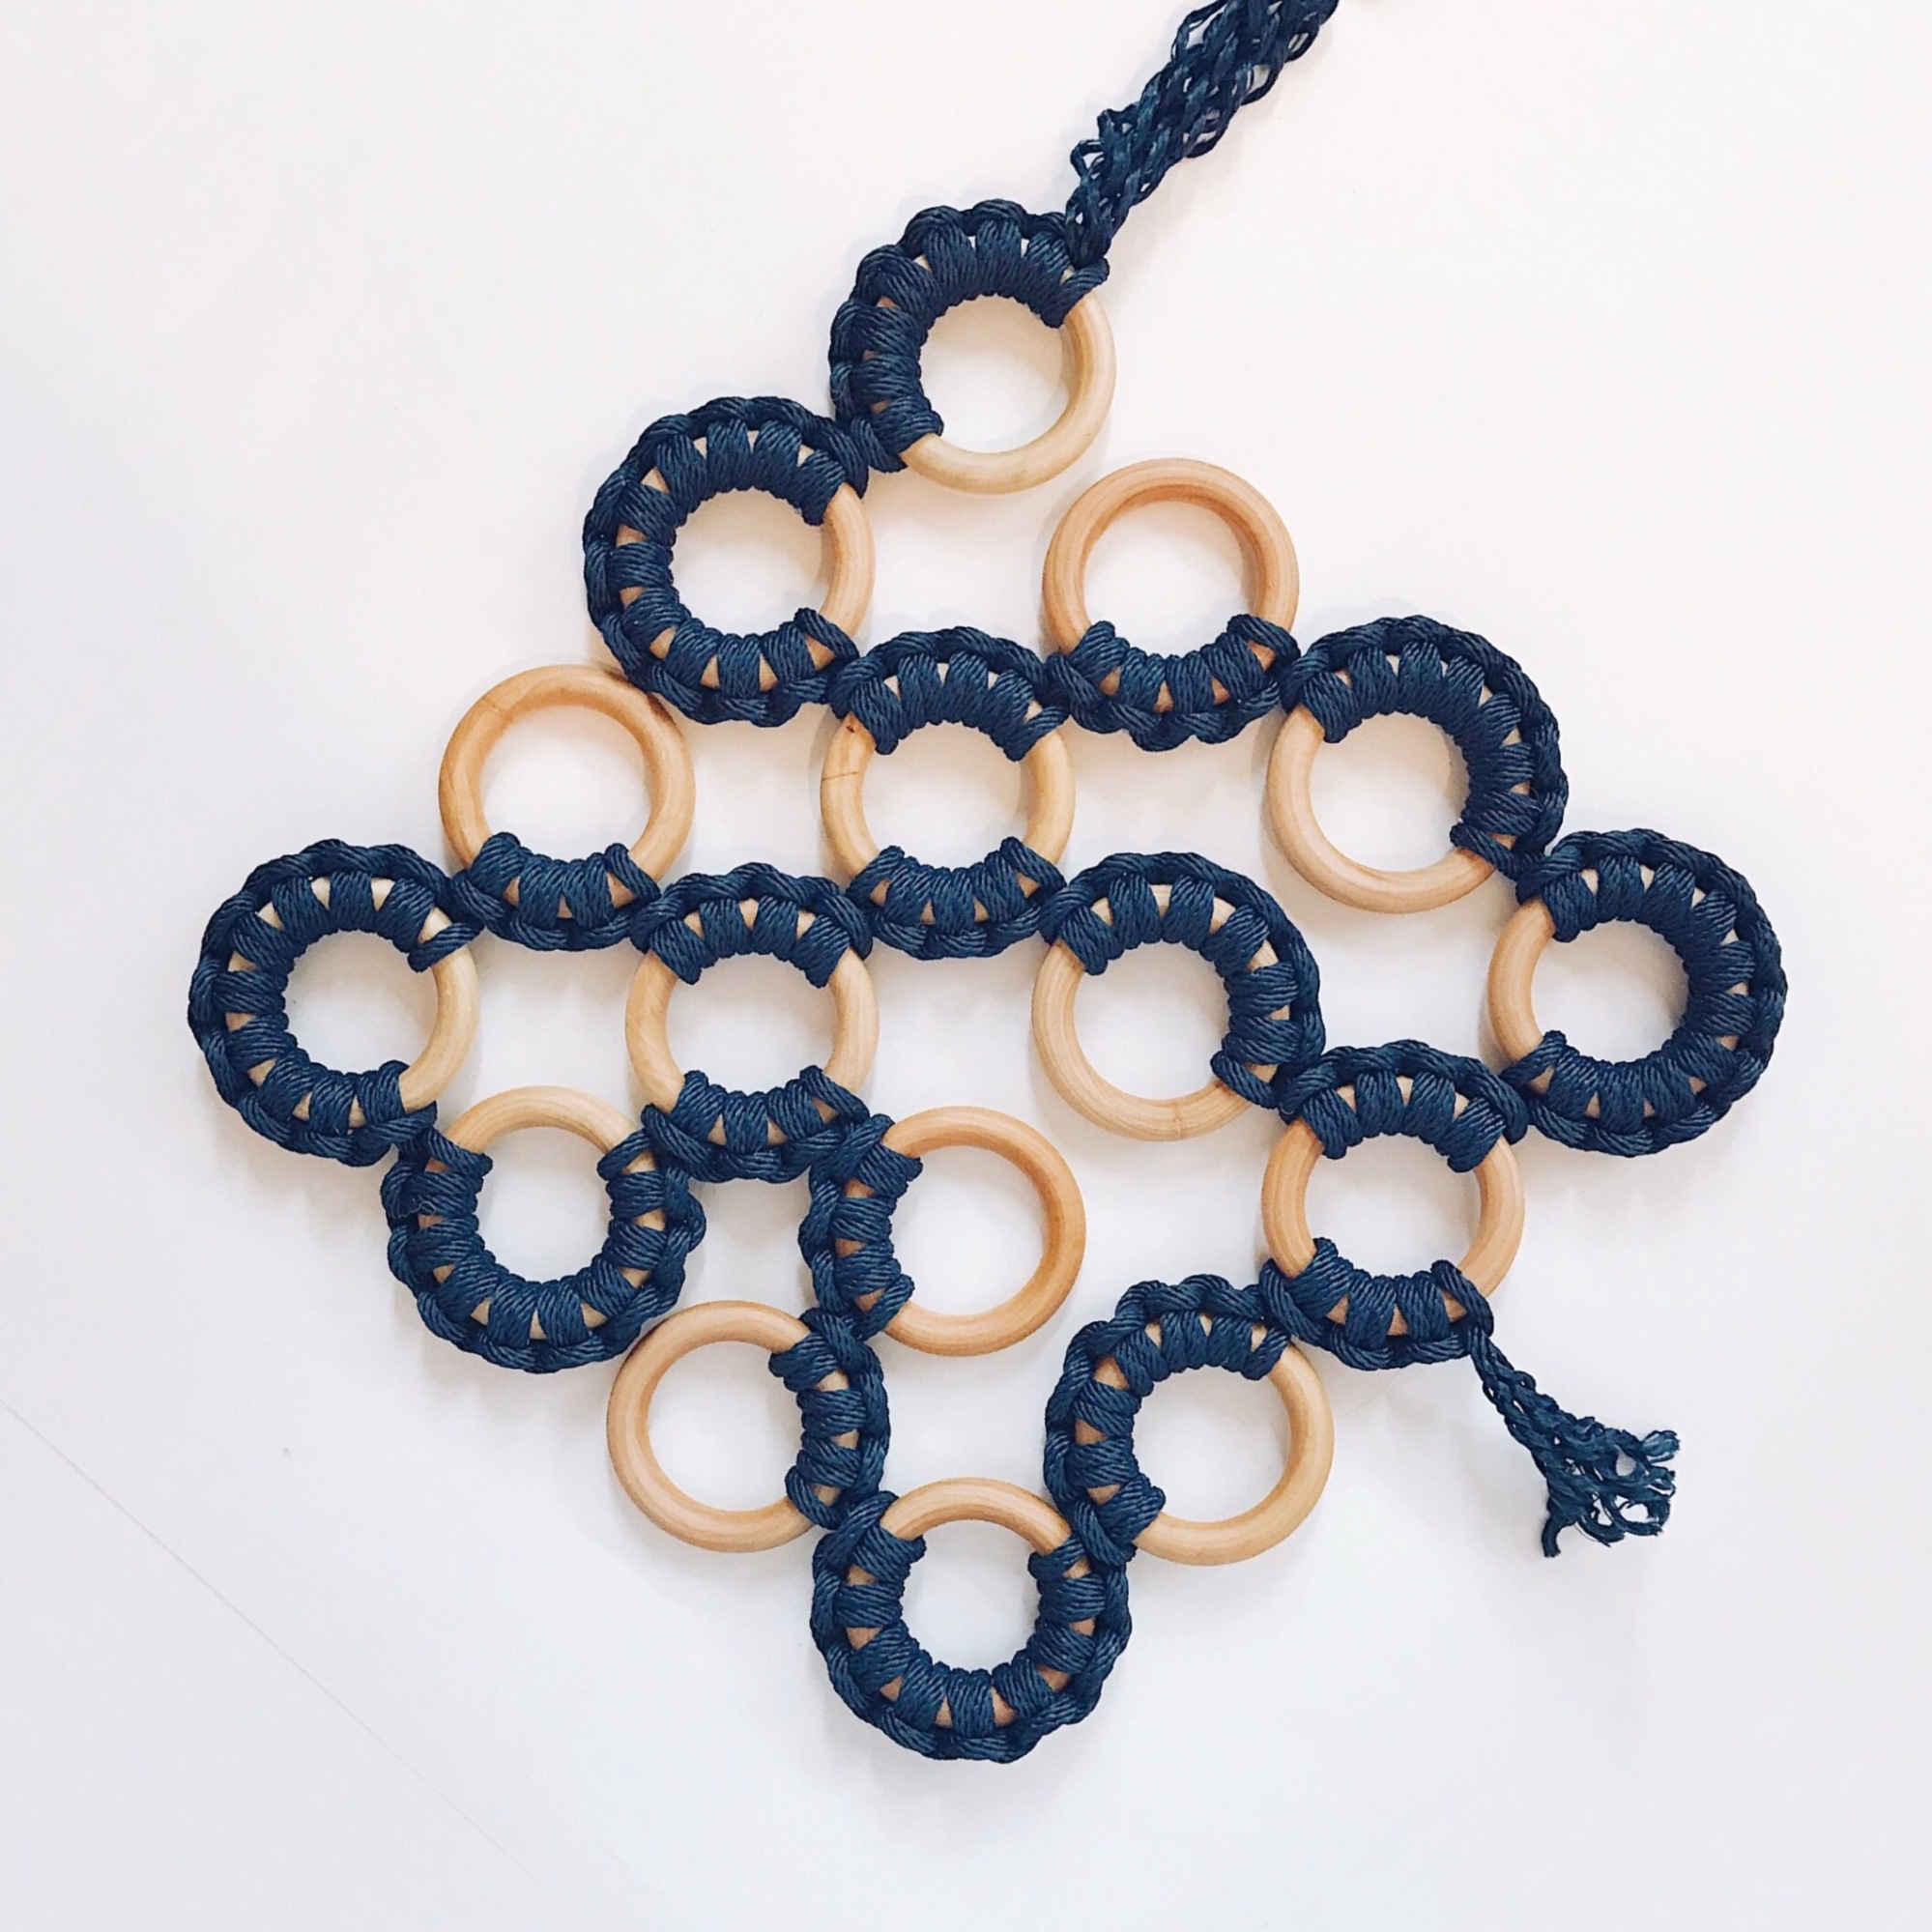 How I Made This: Windy Chien’s Knotted Art